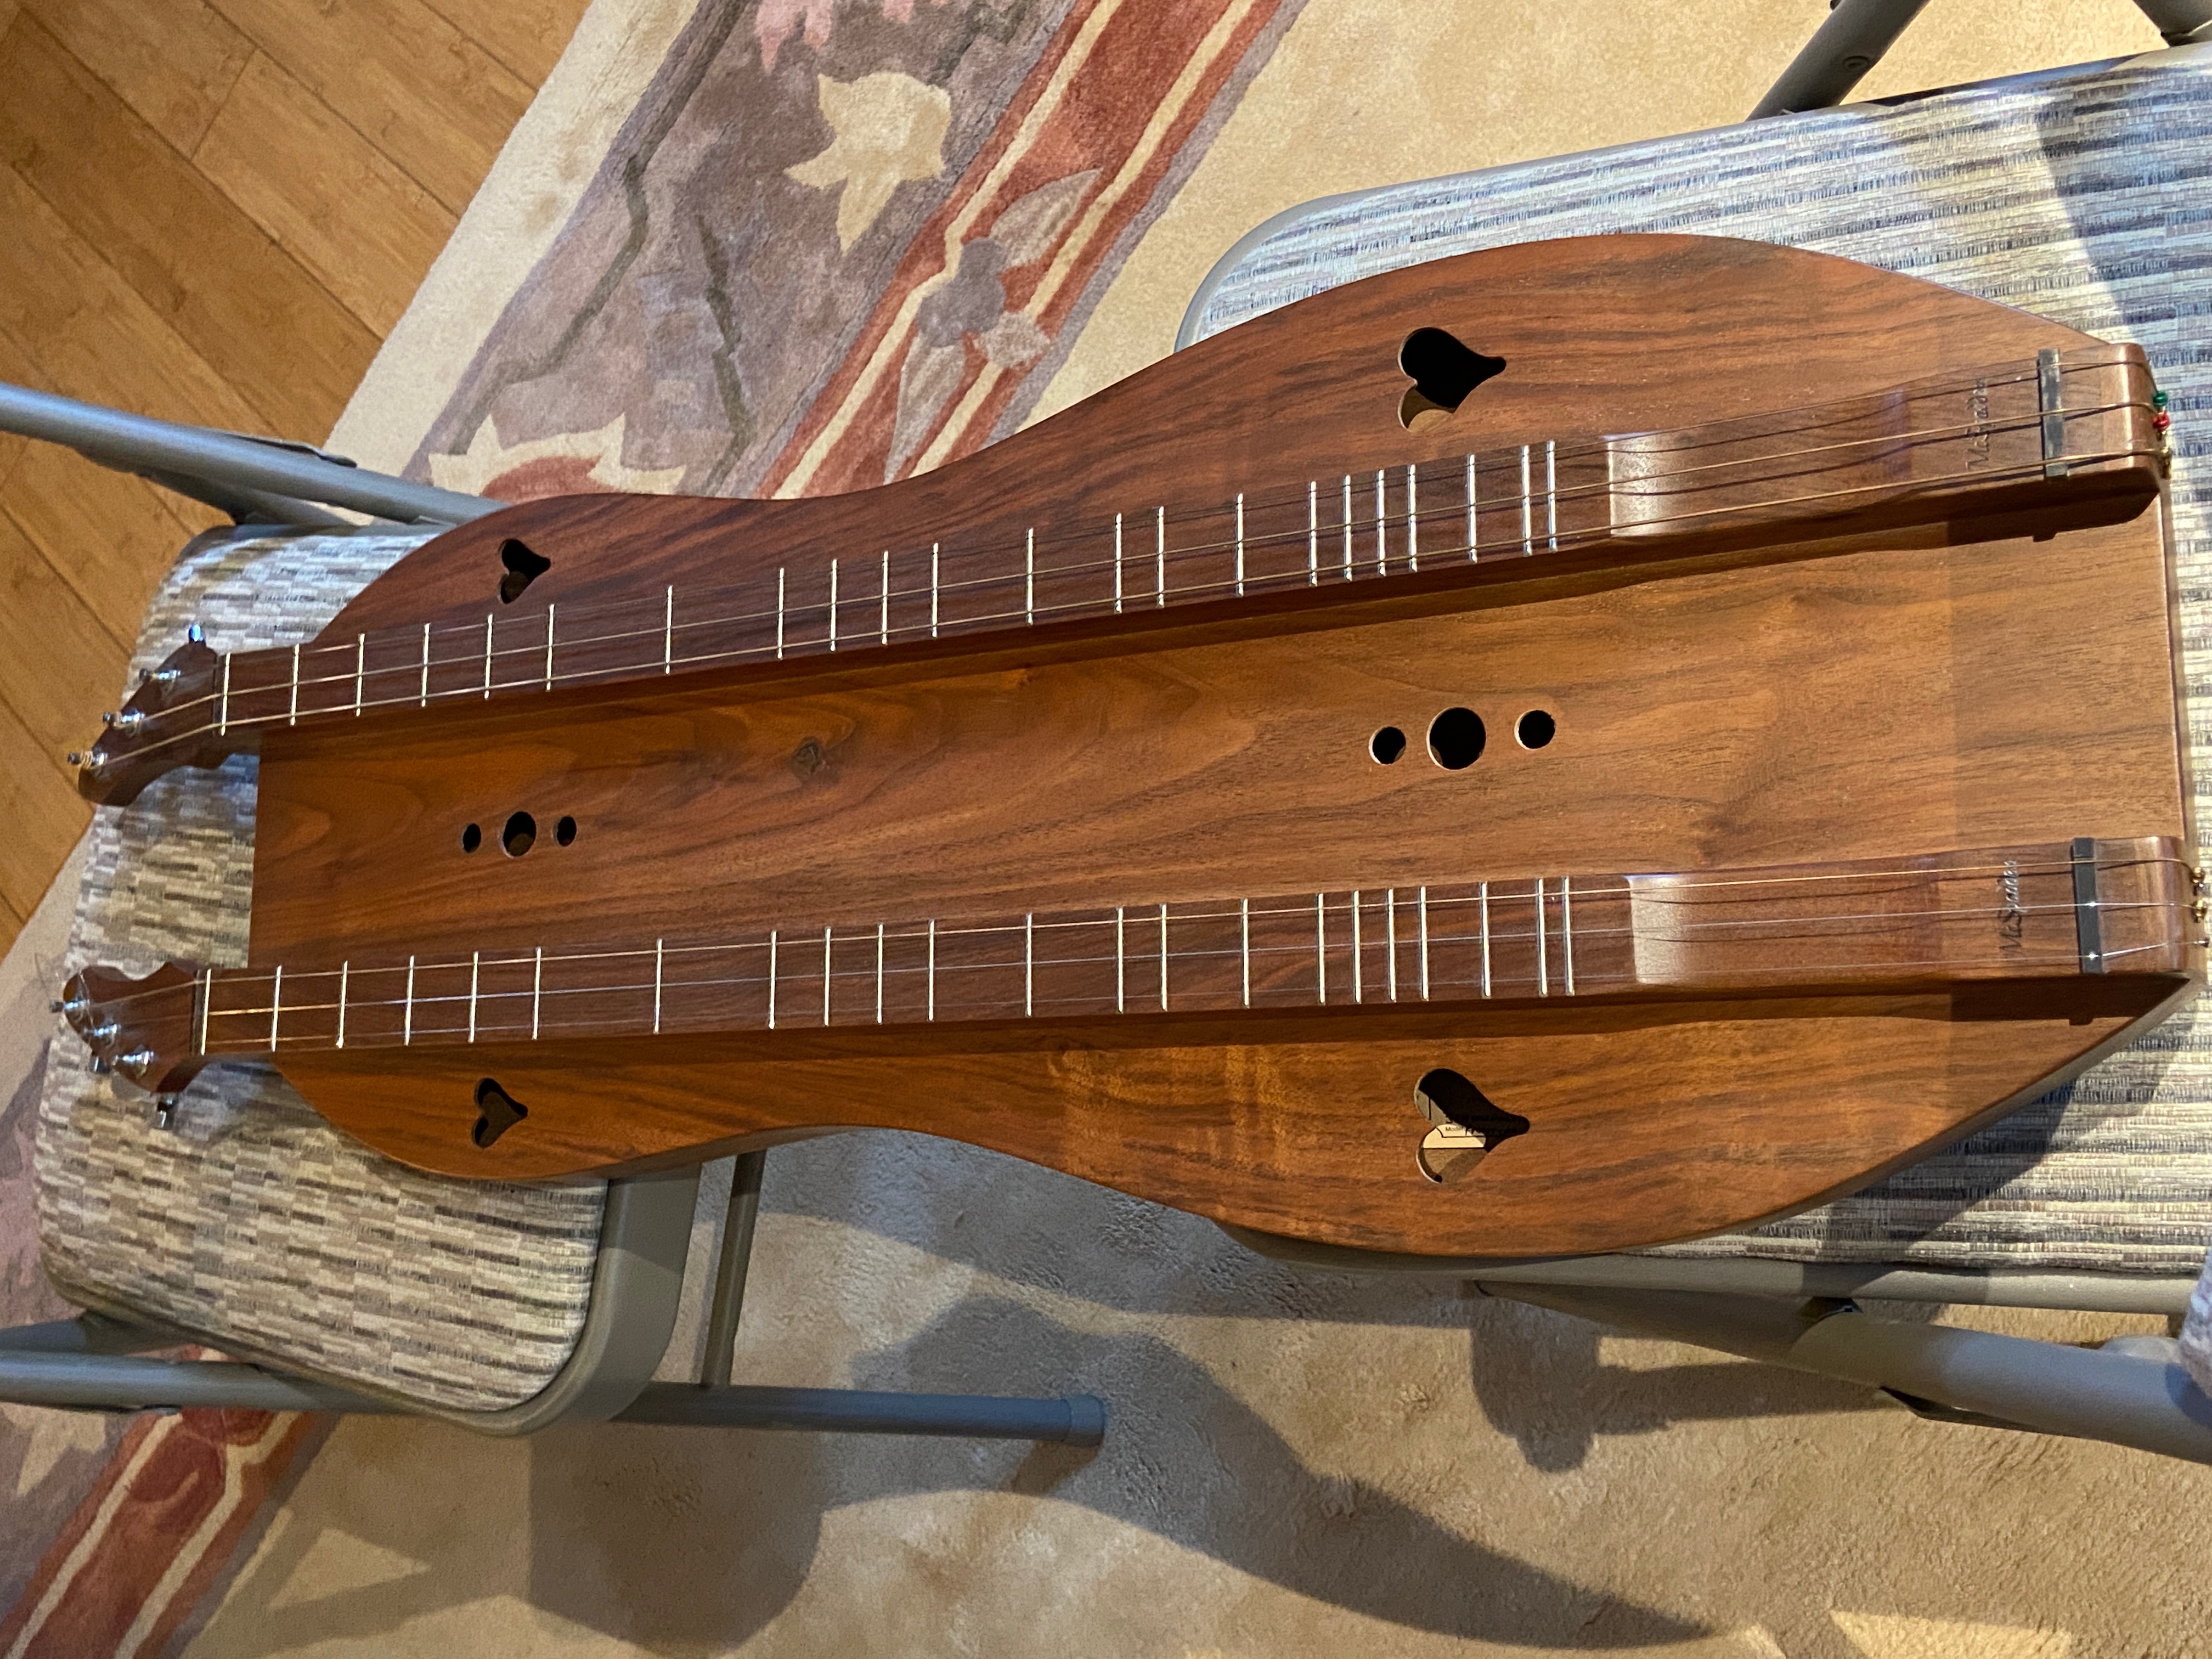 Prototype courting dulcimer made by Jim Woods in 2013 with Arkansas walnut.